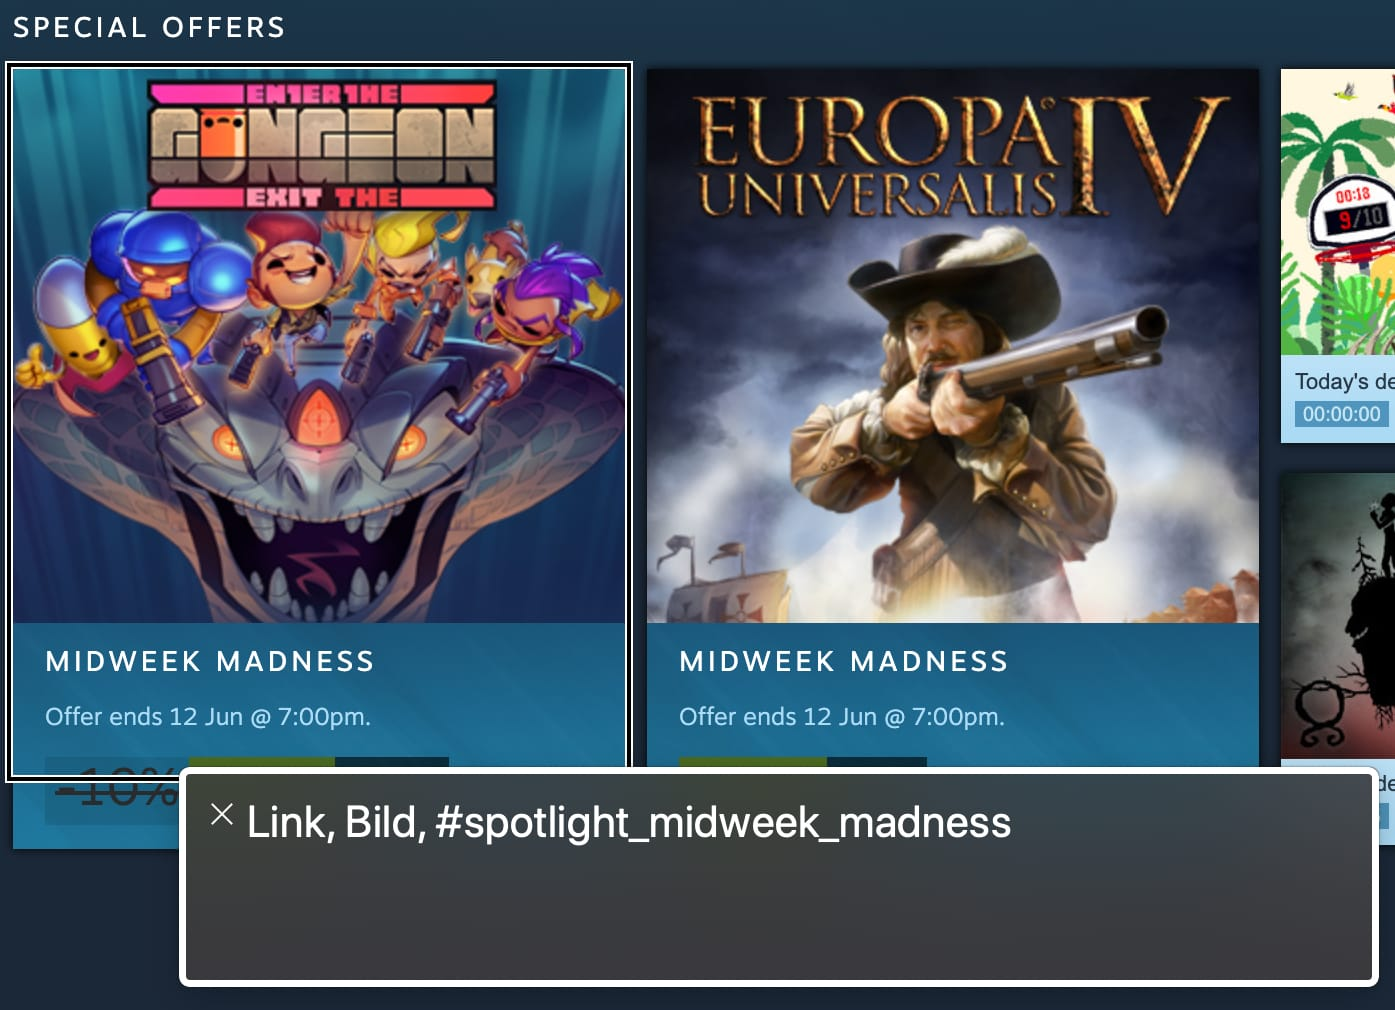 Visiting a game link for the game offer "Enter/Exit the Gungeon" with the VoiceOver screen reader only reads: "Link, image, #spotlight_midweek_madness"